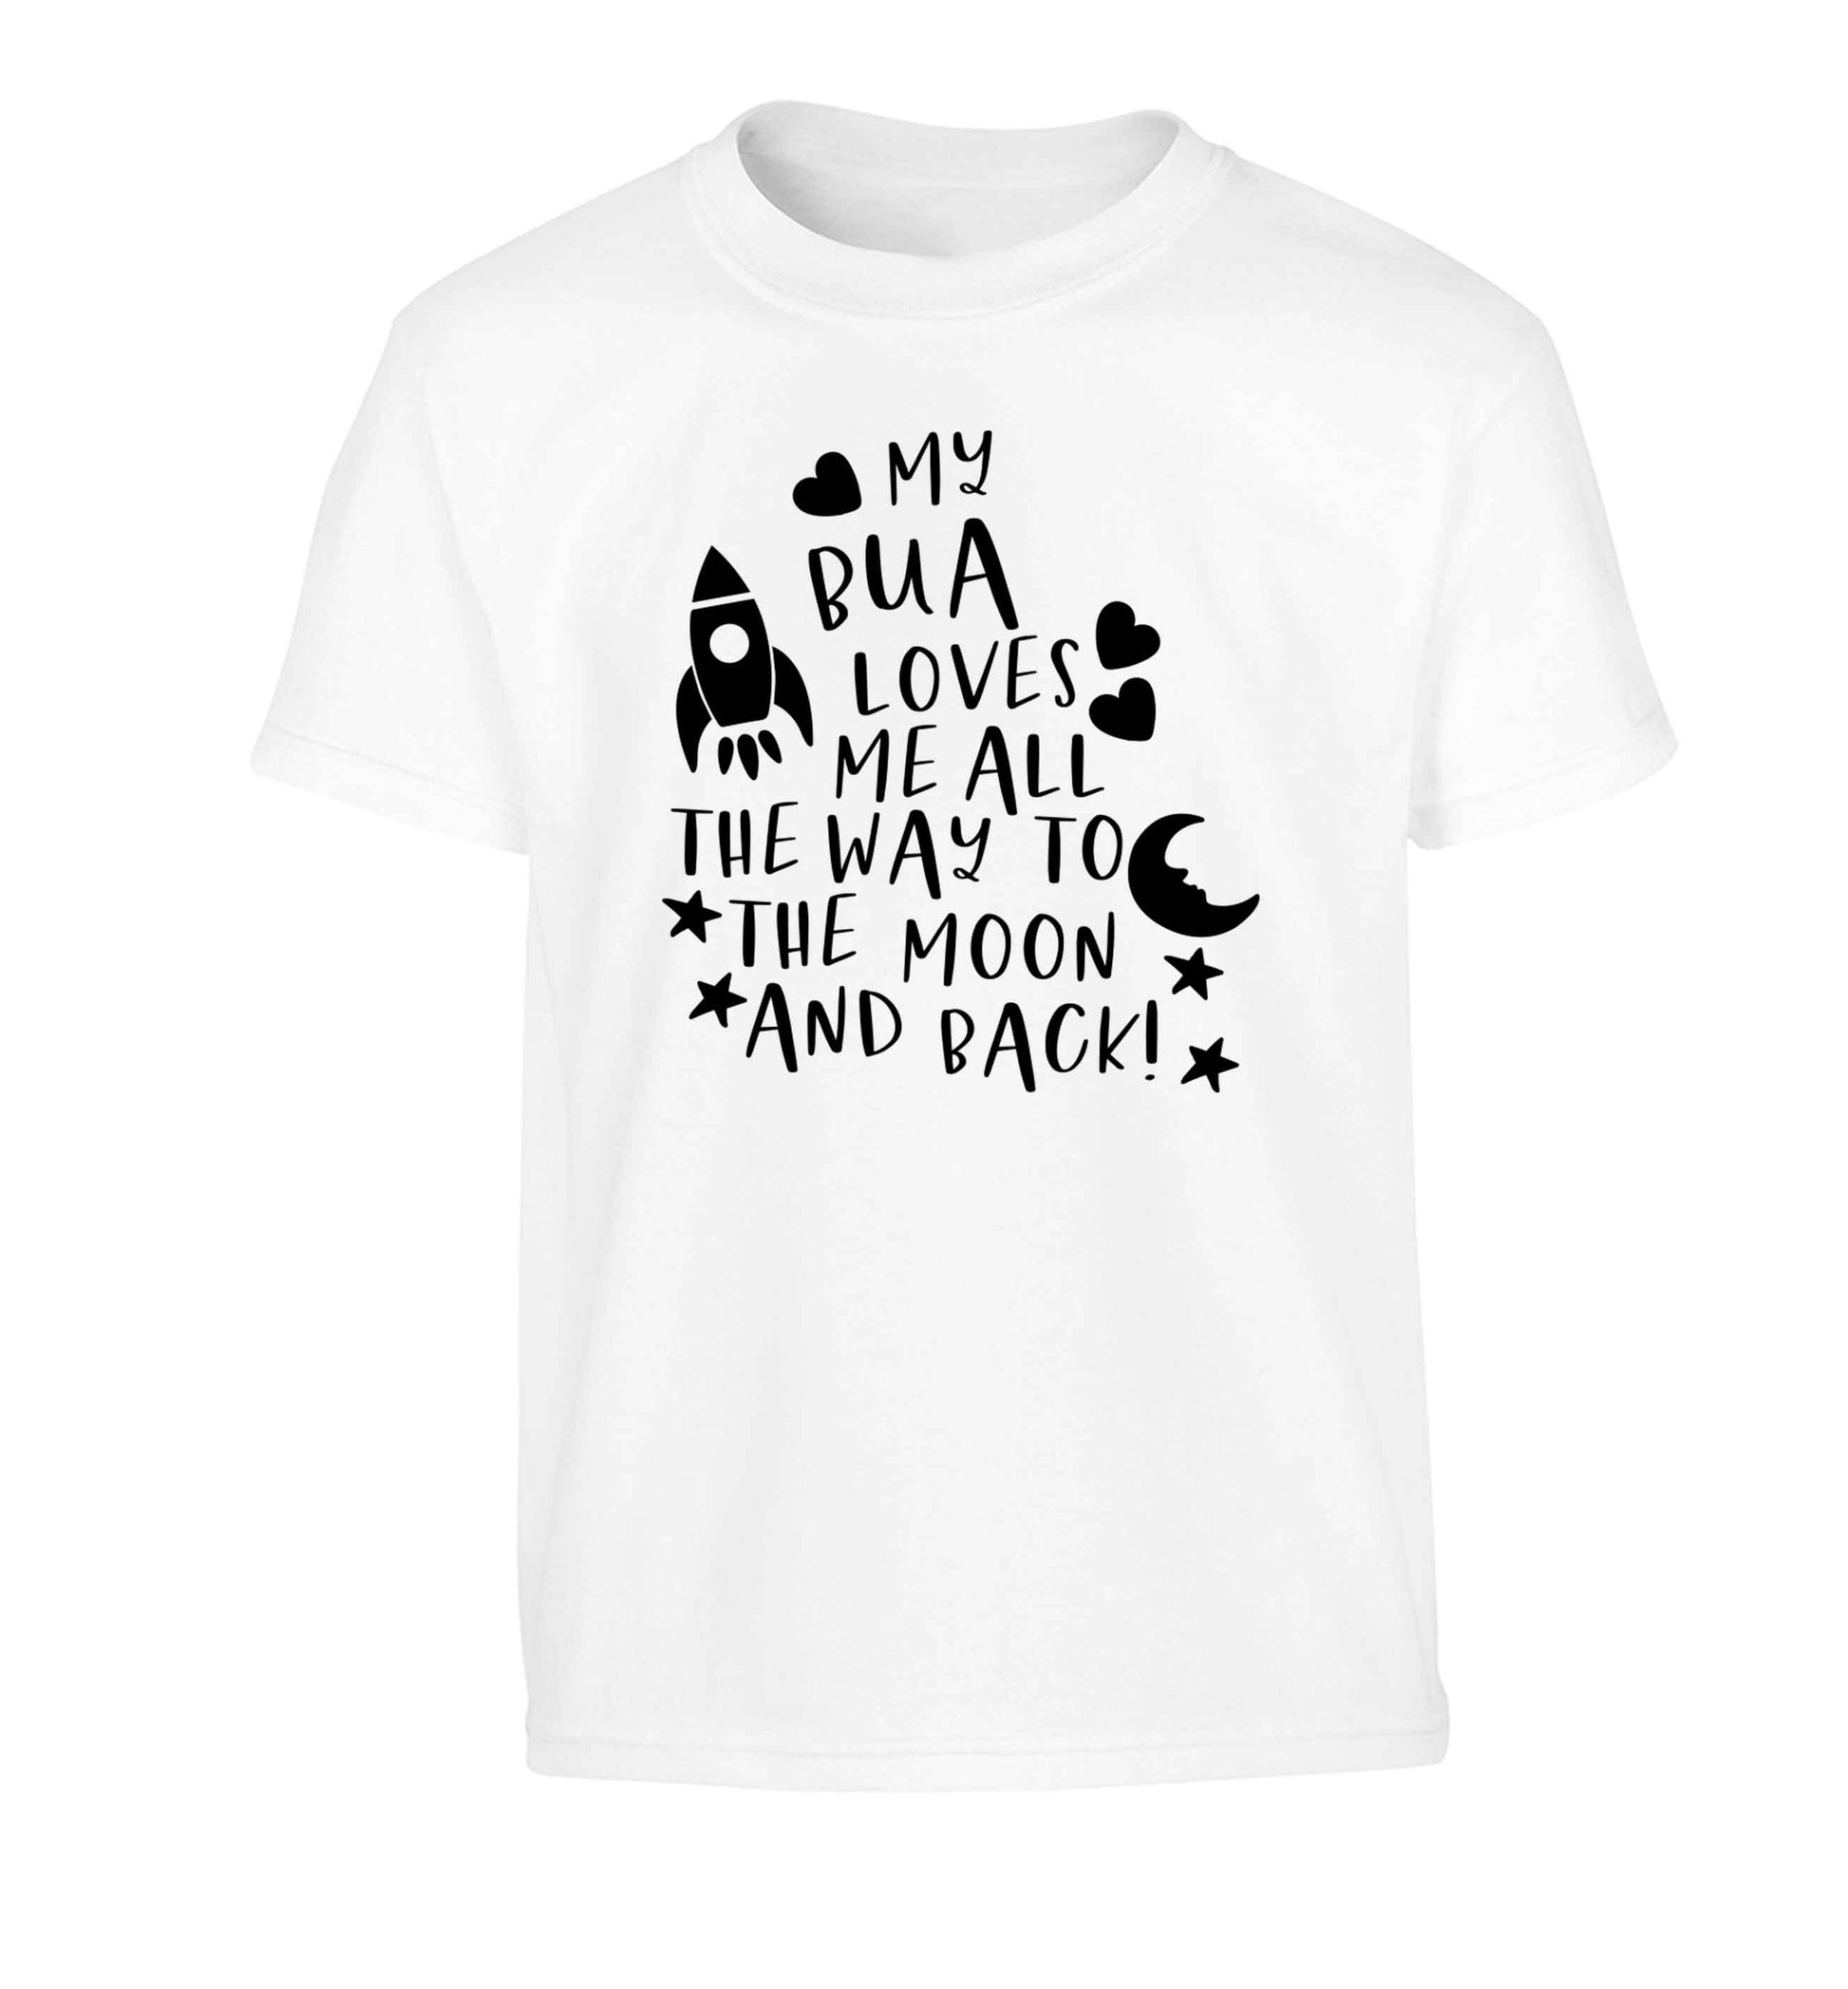 My bua loves me all they way to the moon and back Children's white Tshirt 12-13 Years